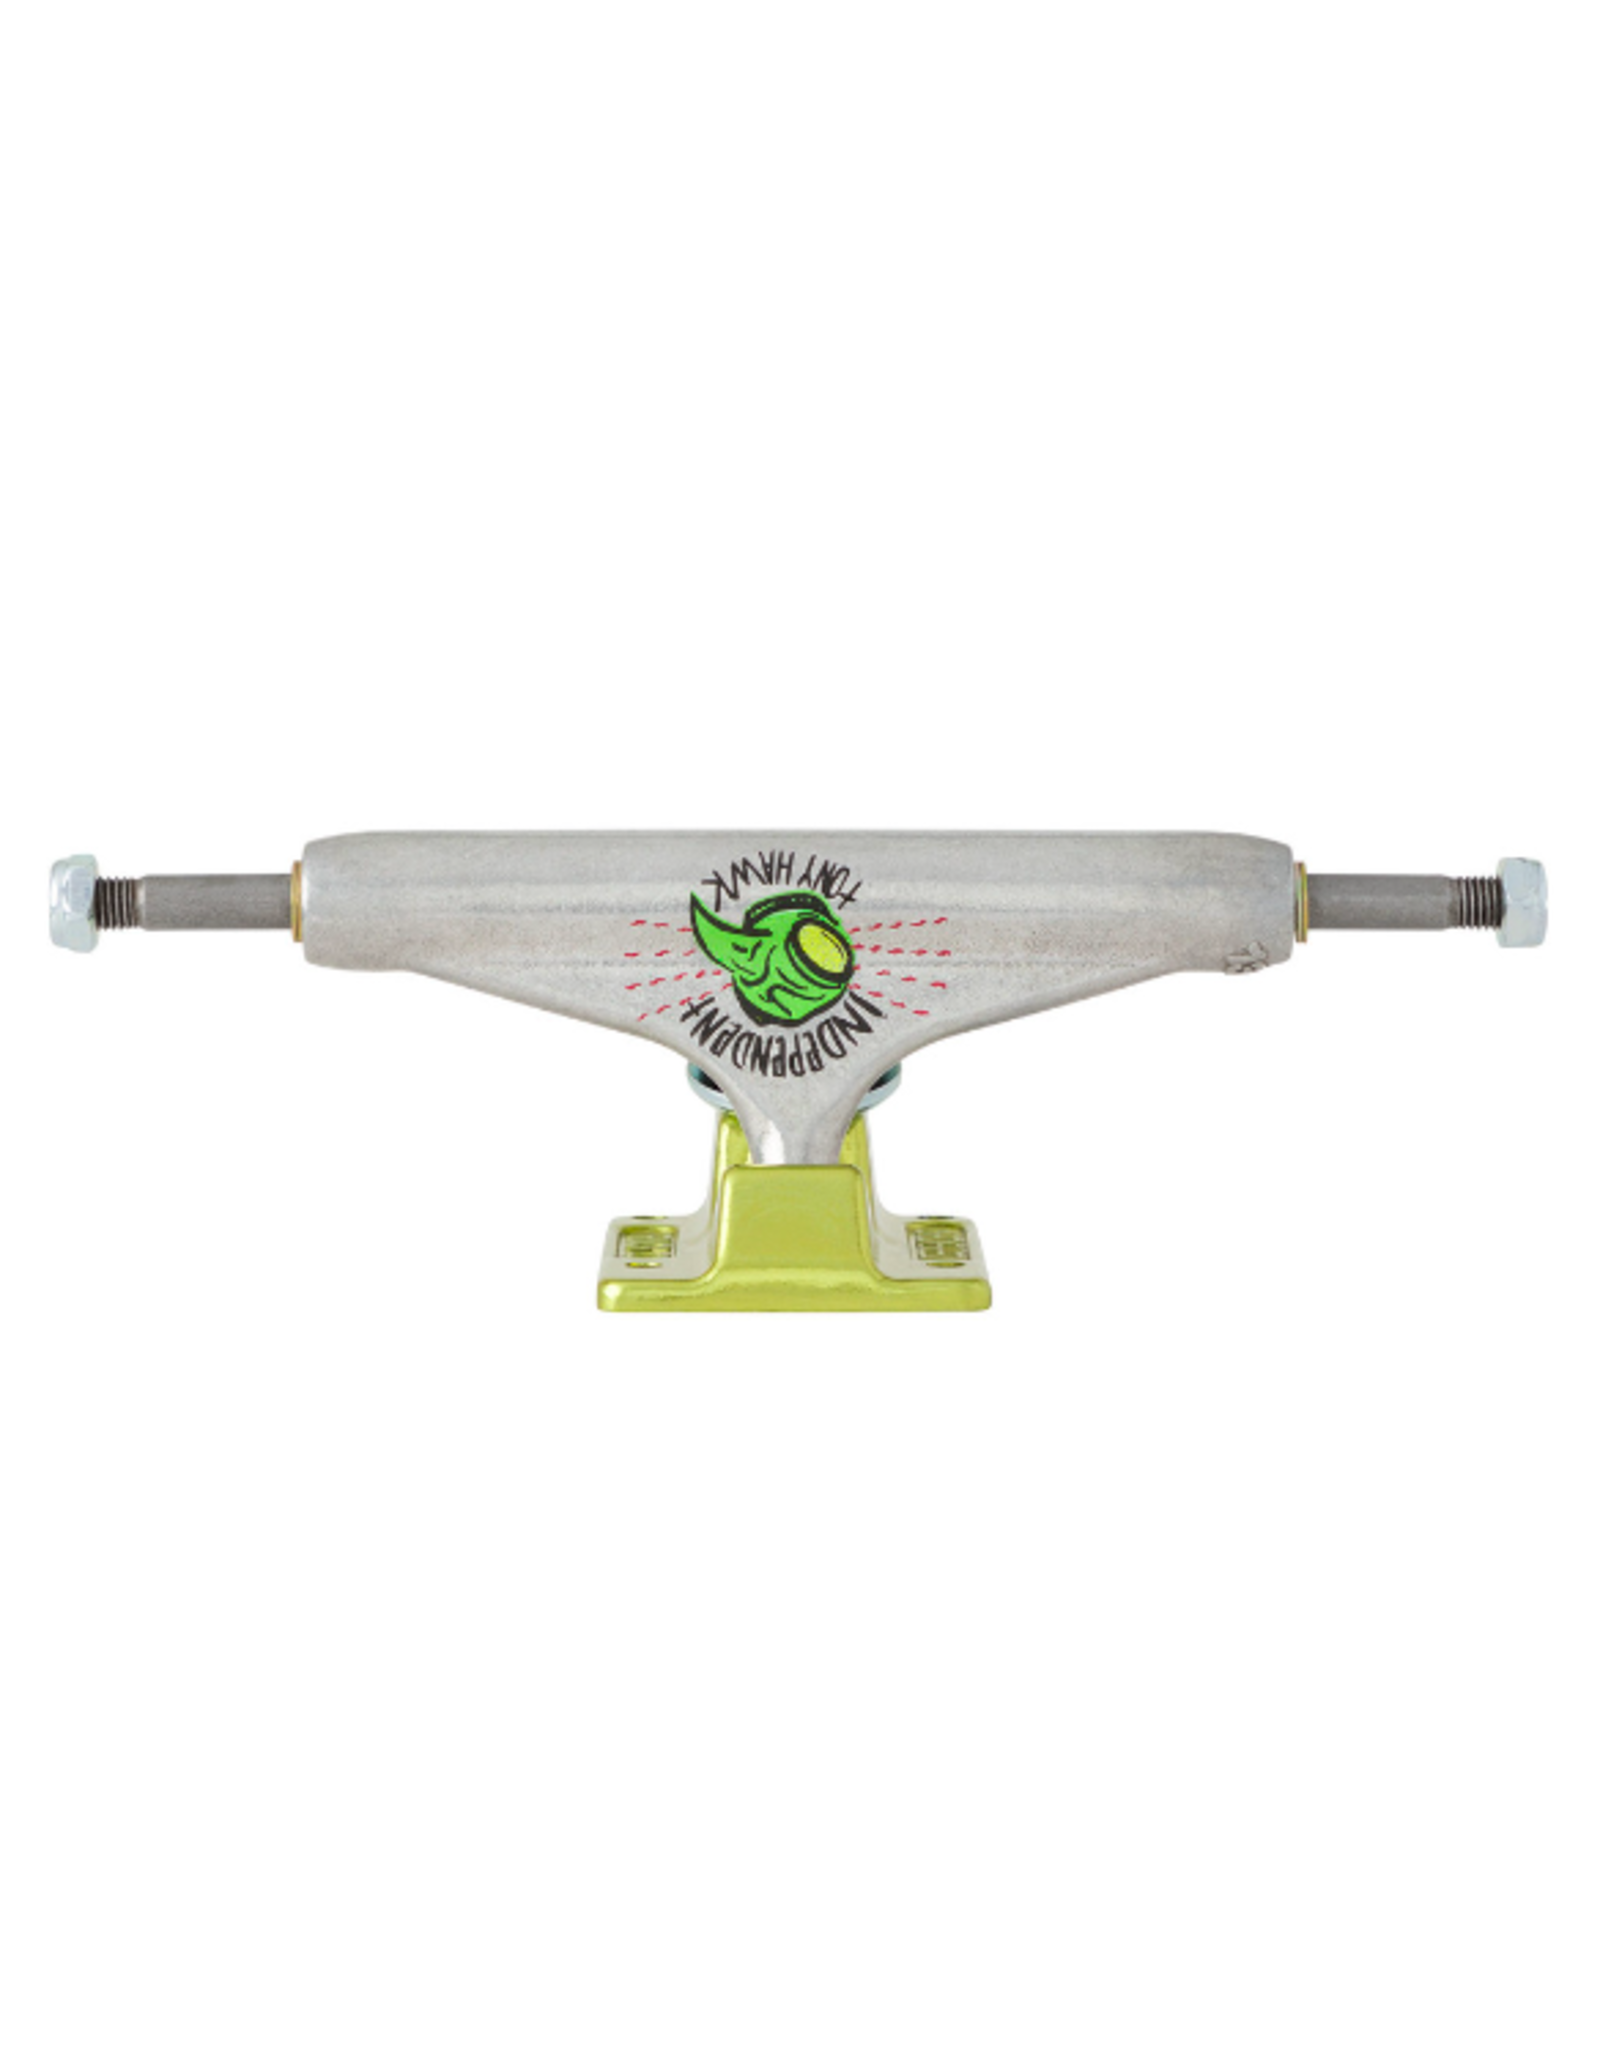 Independent Stage 11 Hawk Transmission Forged Hollow Trucks Silver/Green 149